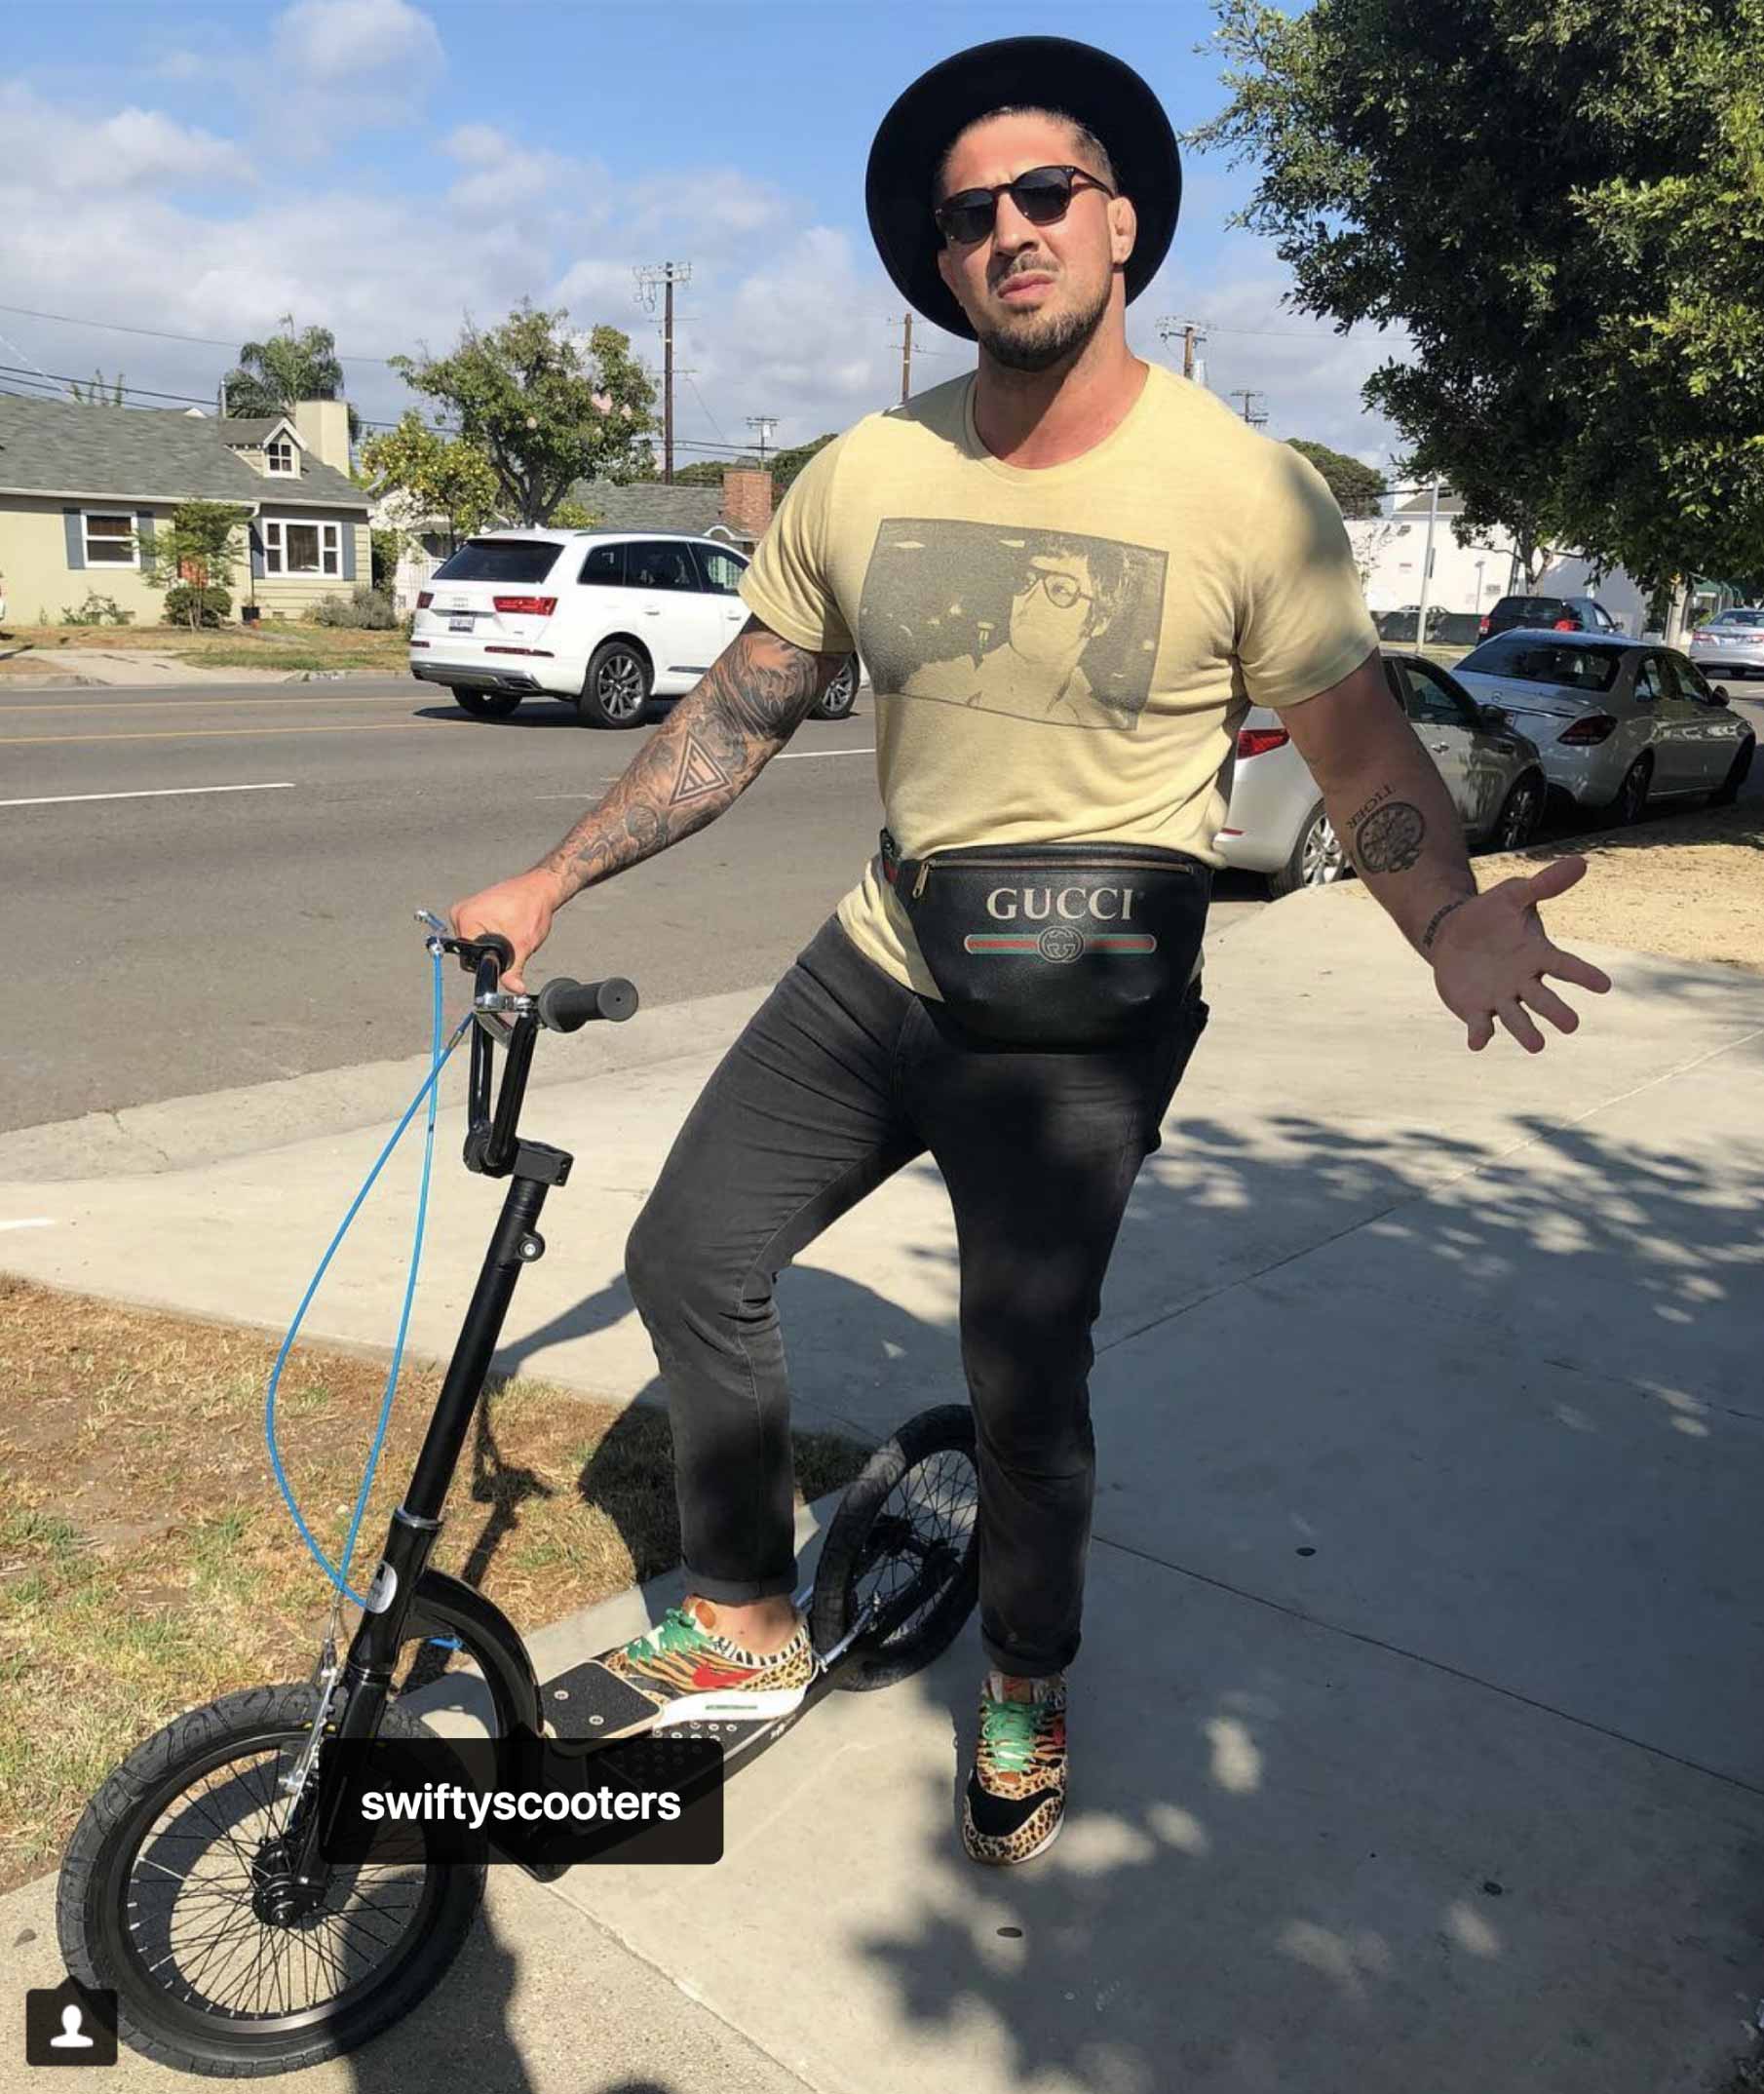 swifty air, adult scooter, kick scooter, swifty scooters, bmx scooter, dirt scooter with big wheels